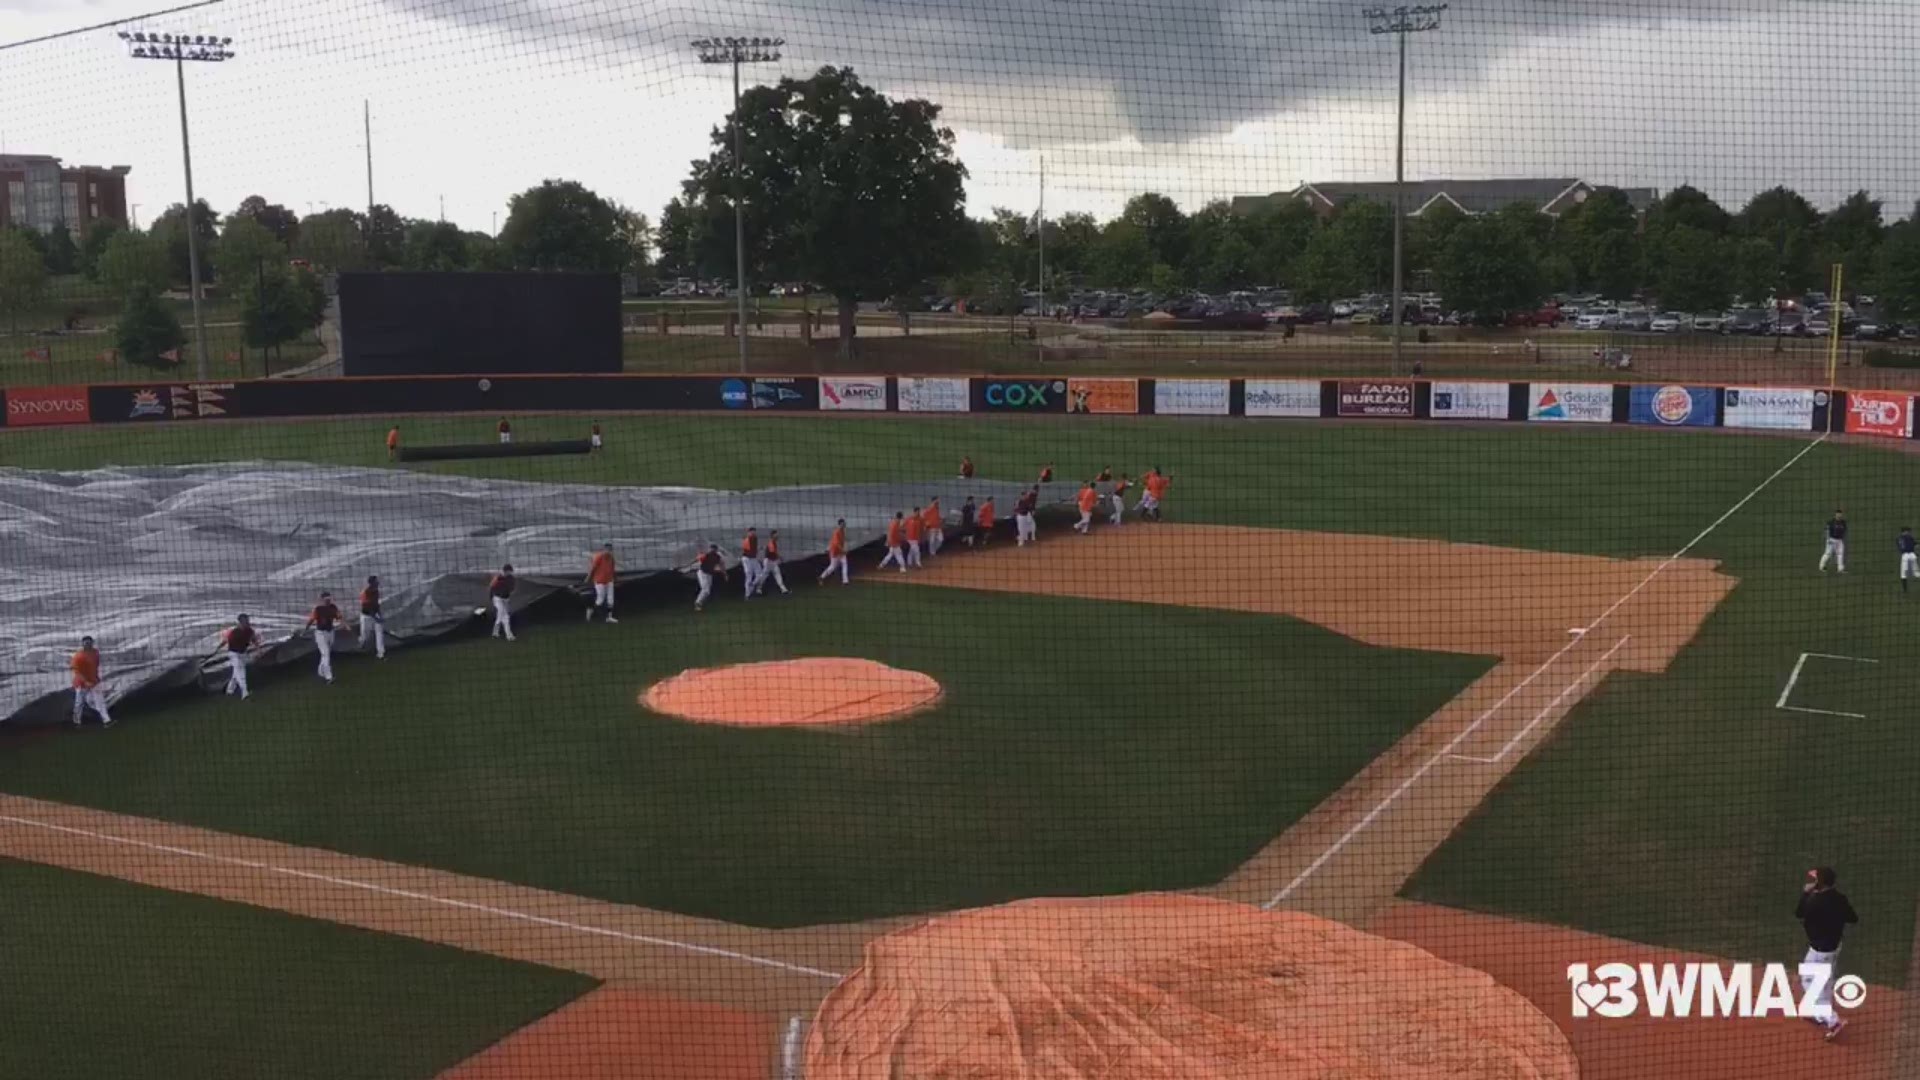 A strong storm moving through Central Georgia evacuated the stadium on Mercer's campus. The storm caused some problems as the Bears attempted to put the tarp on the field. The tarp obviously had other ideas: